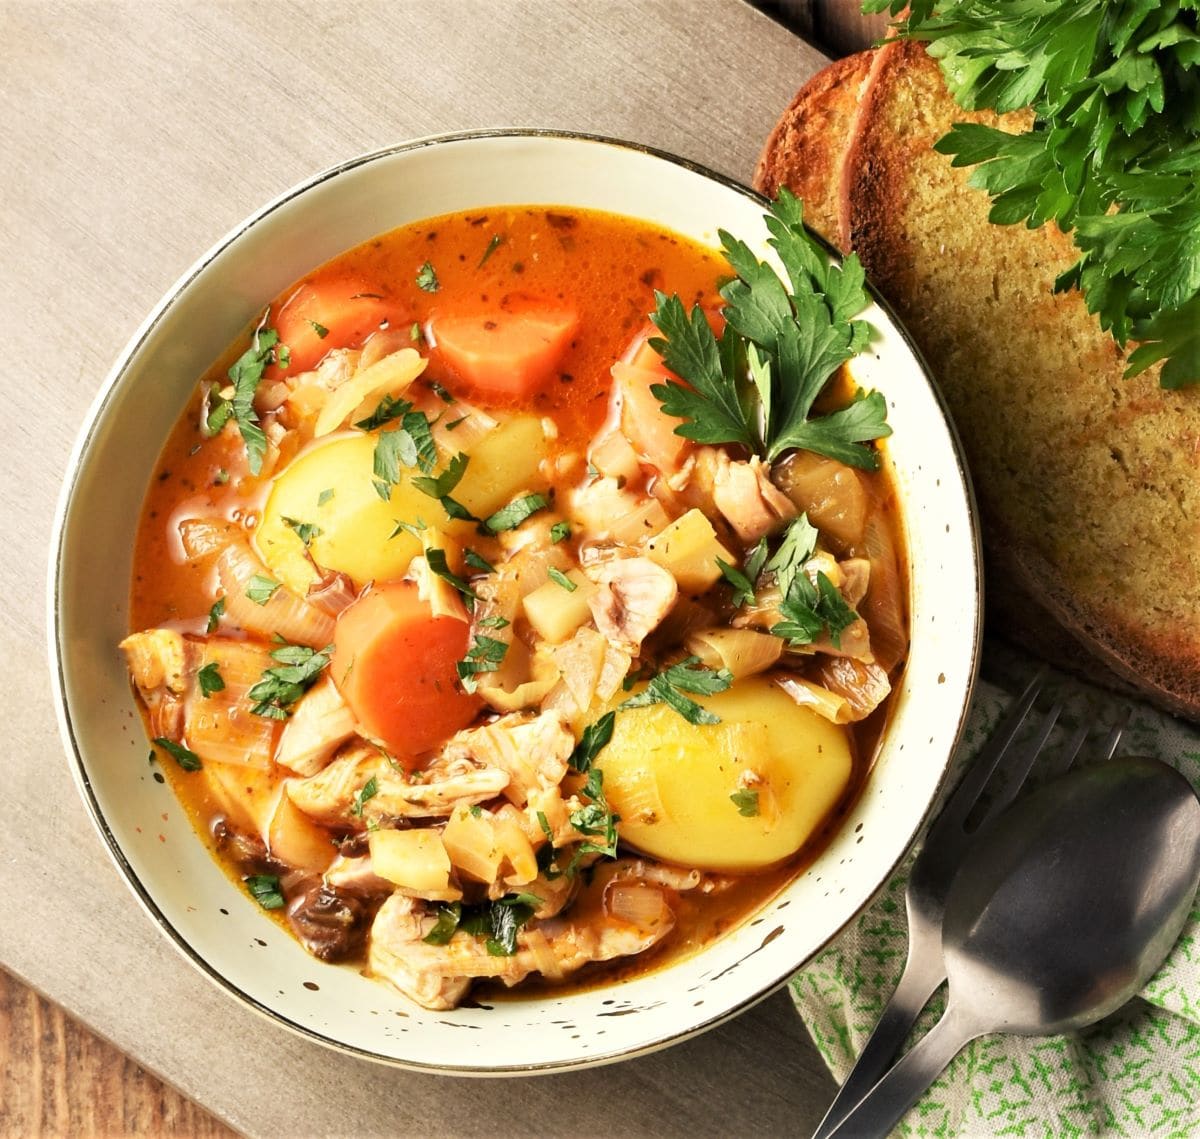 Chicken and potato stew in bowl with vegetables and parsley.